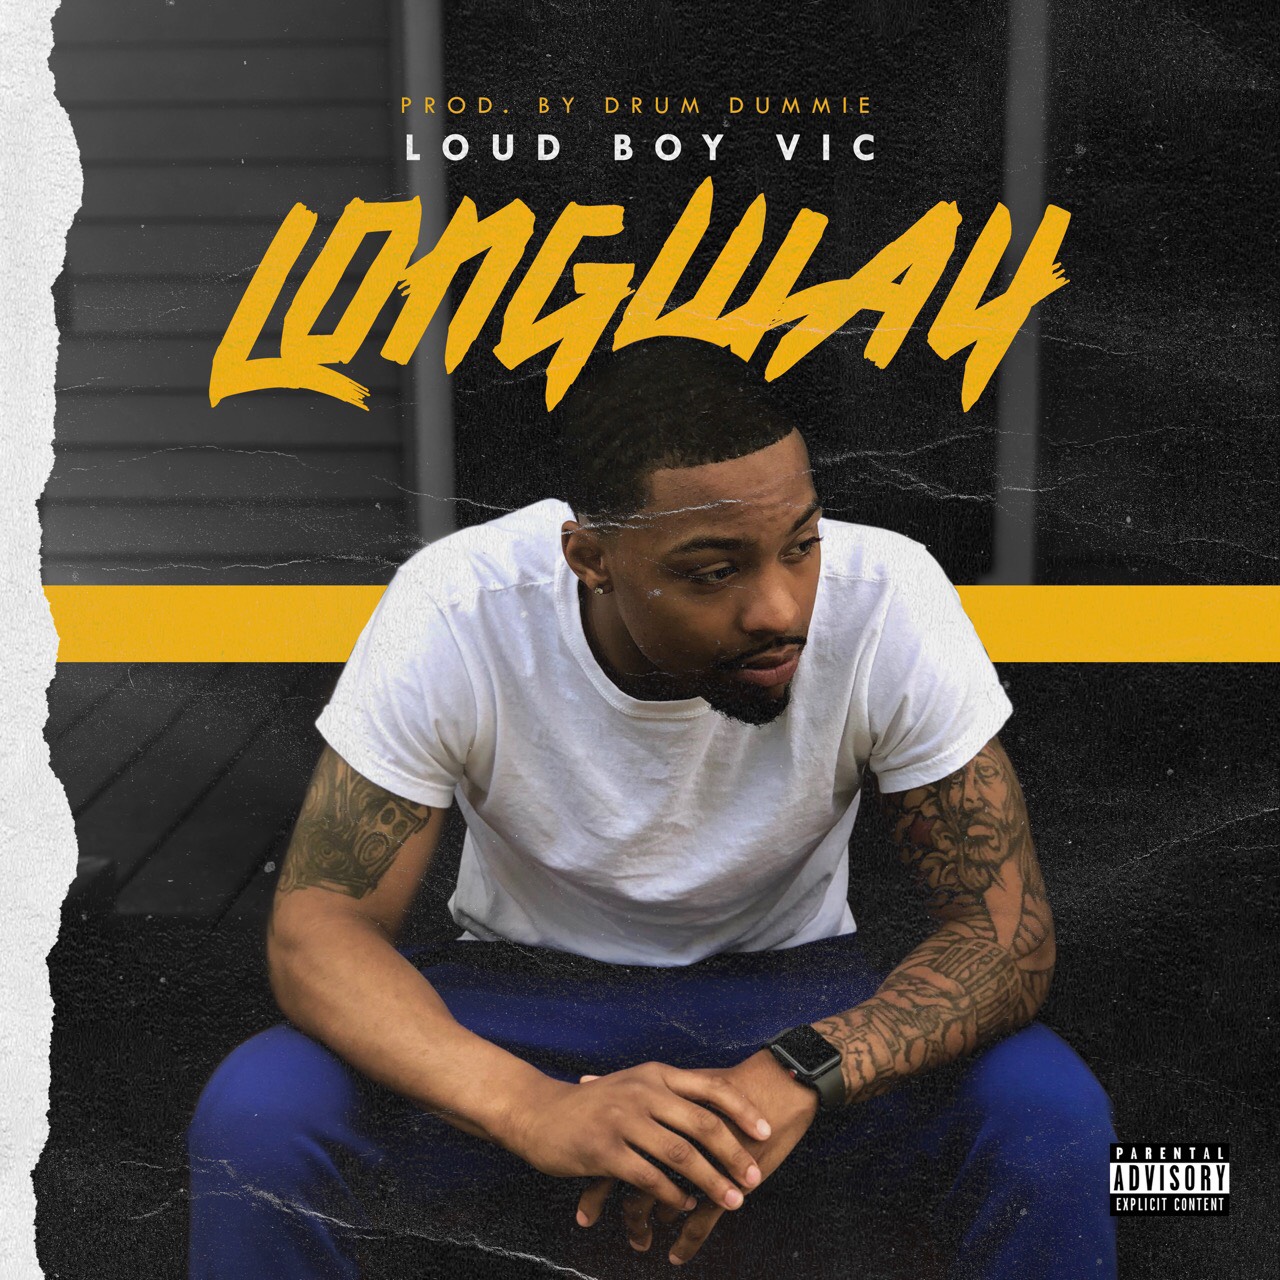 Loud Boy Vic takes to the streets with new single “Longway” @LBO_Vic @KingDrumDummie